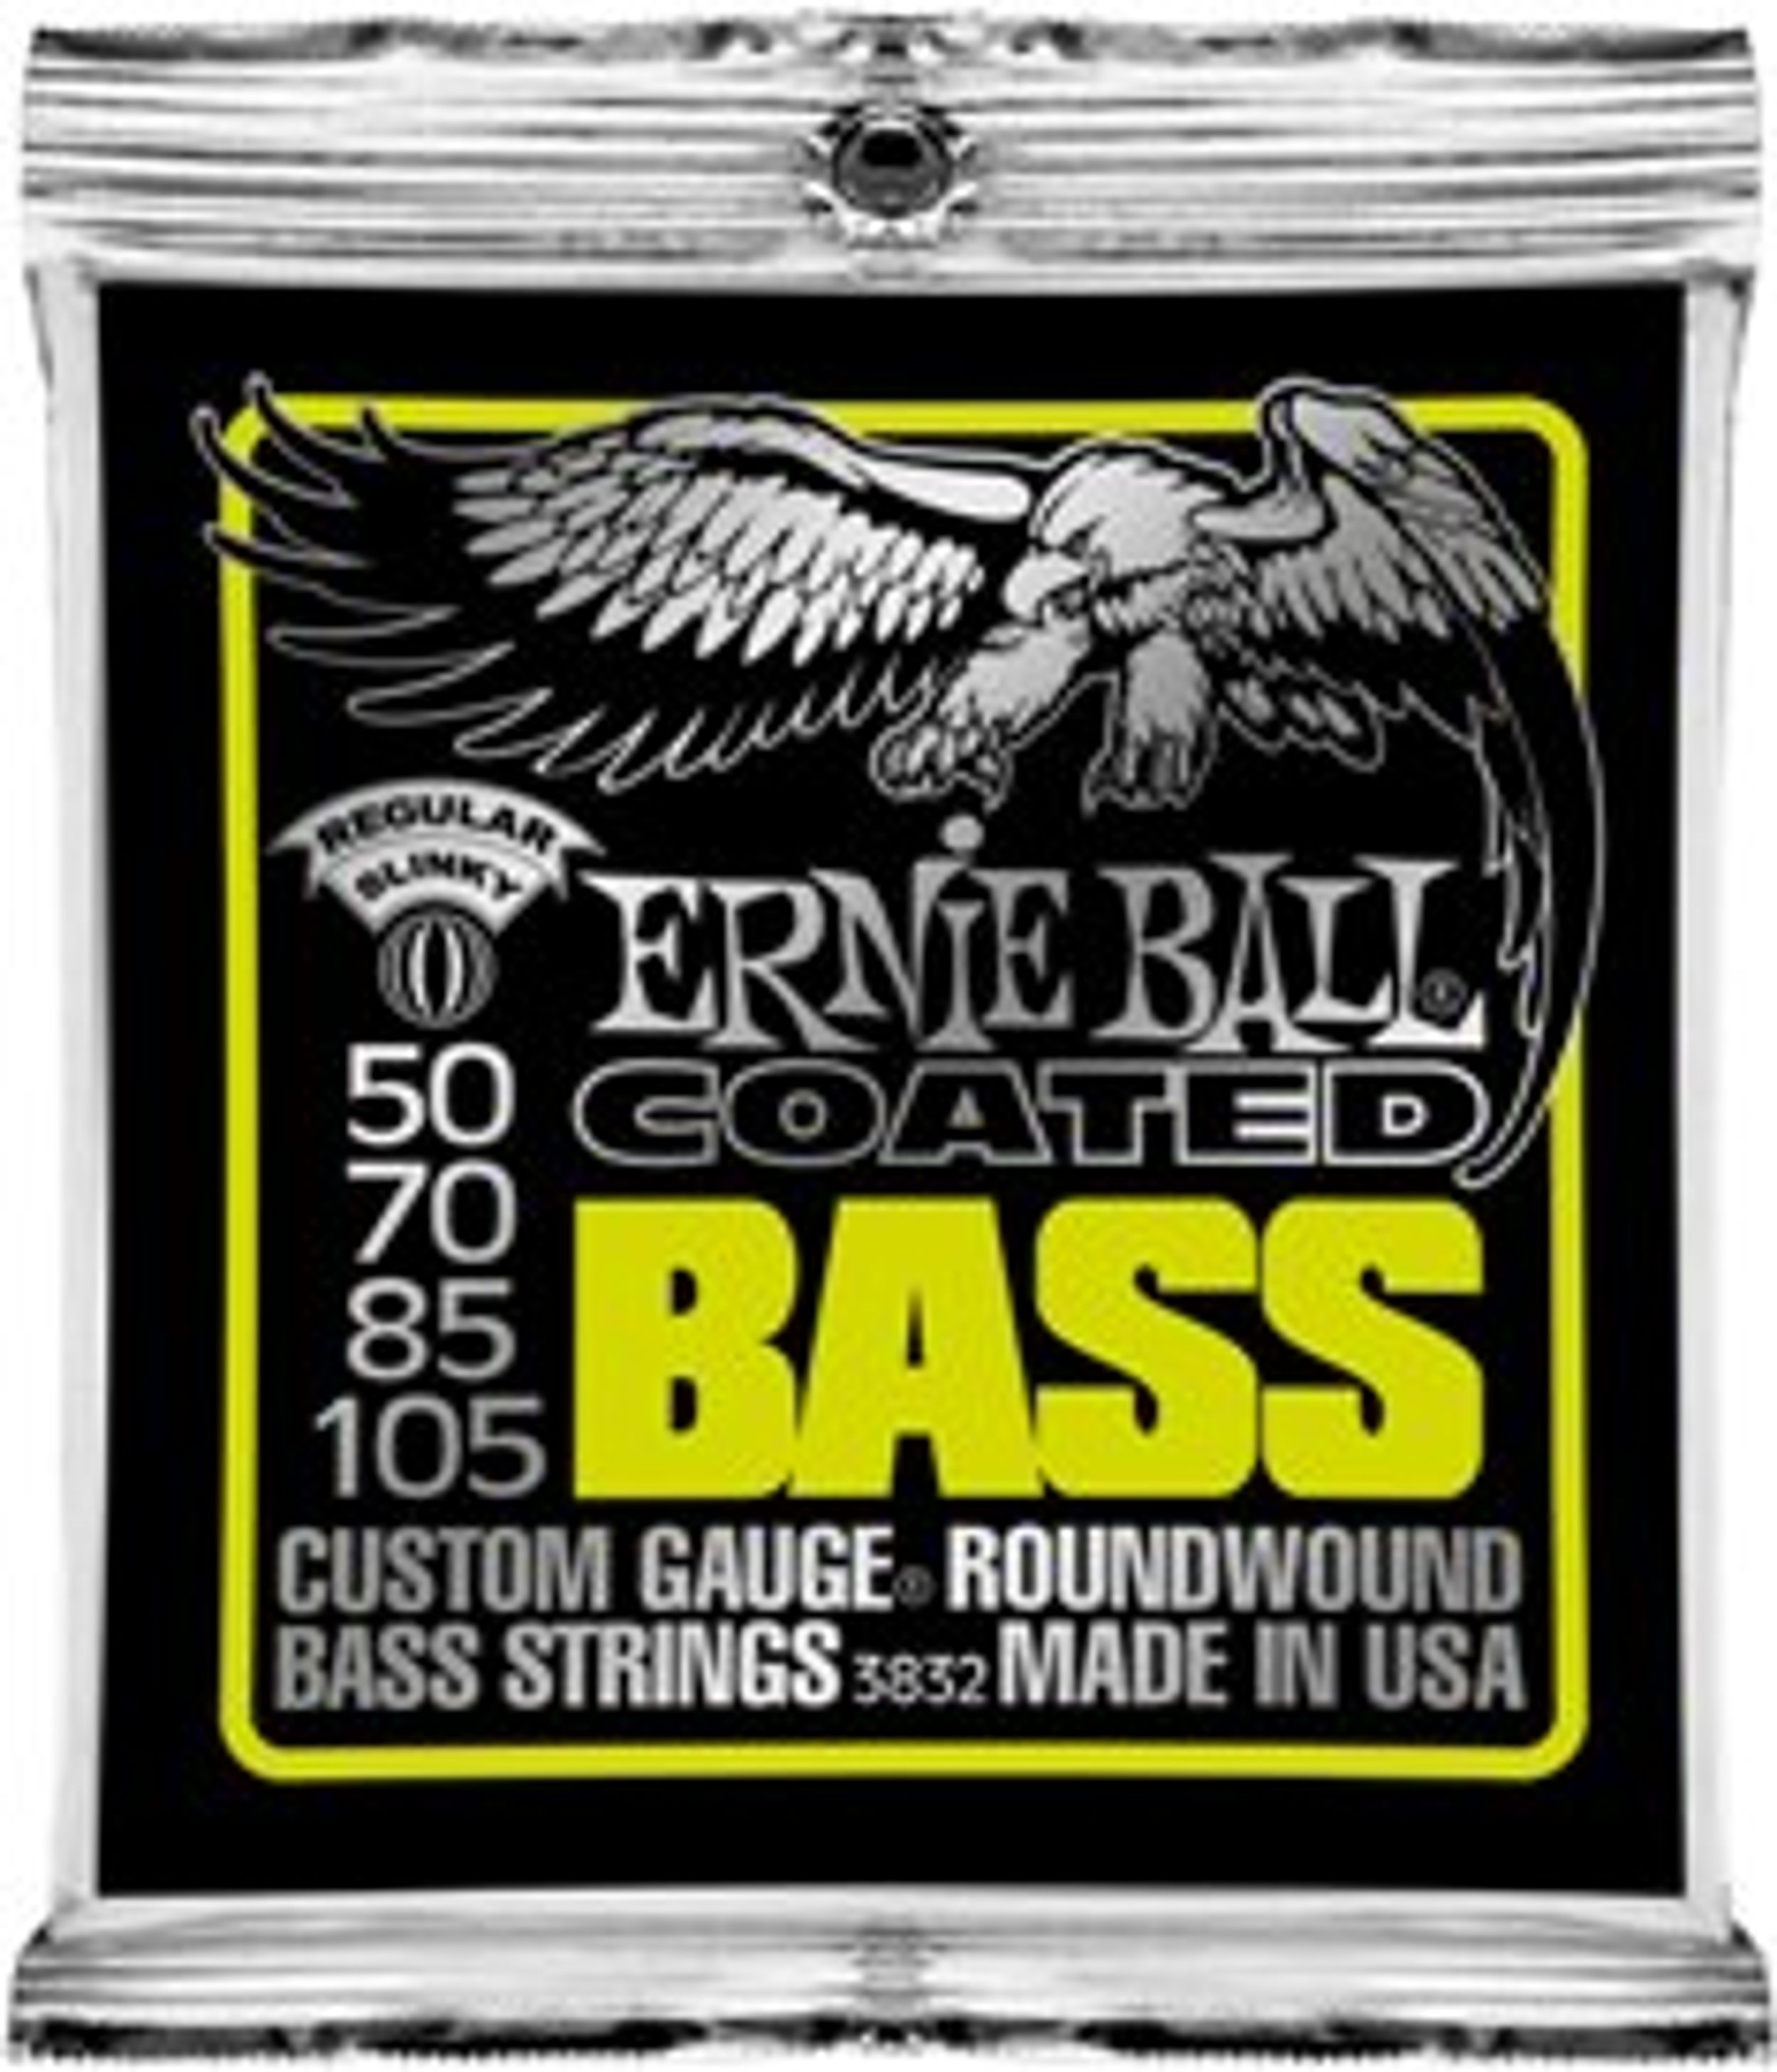 Ernie Ball Releases New Coated Bass Strings 